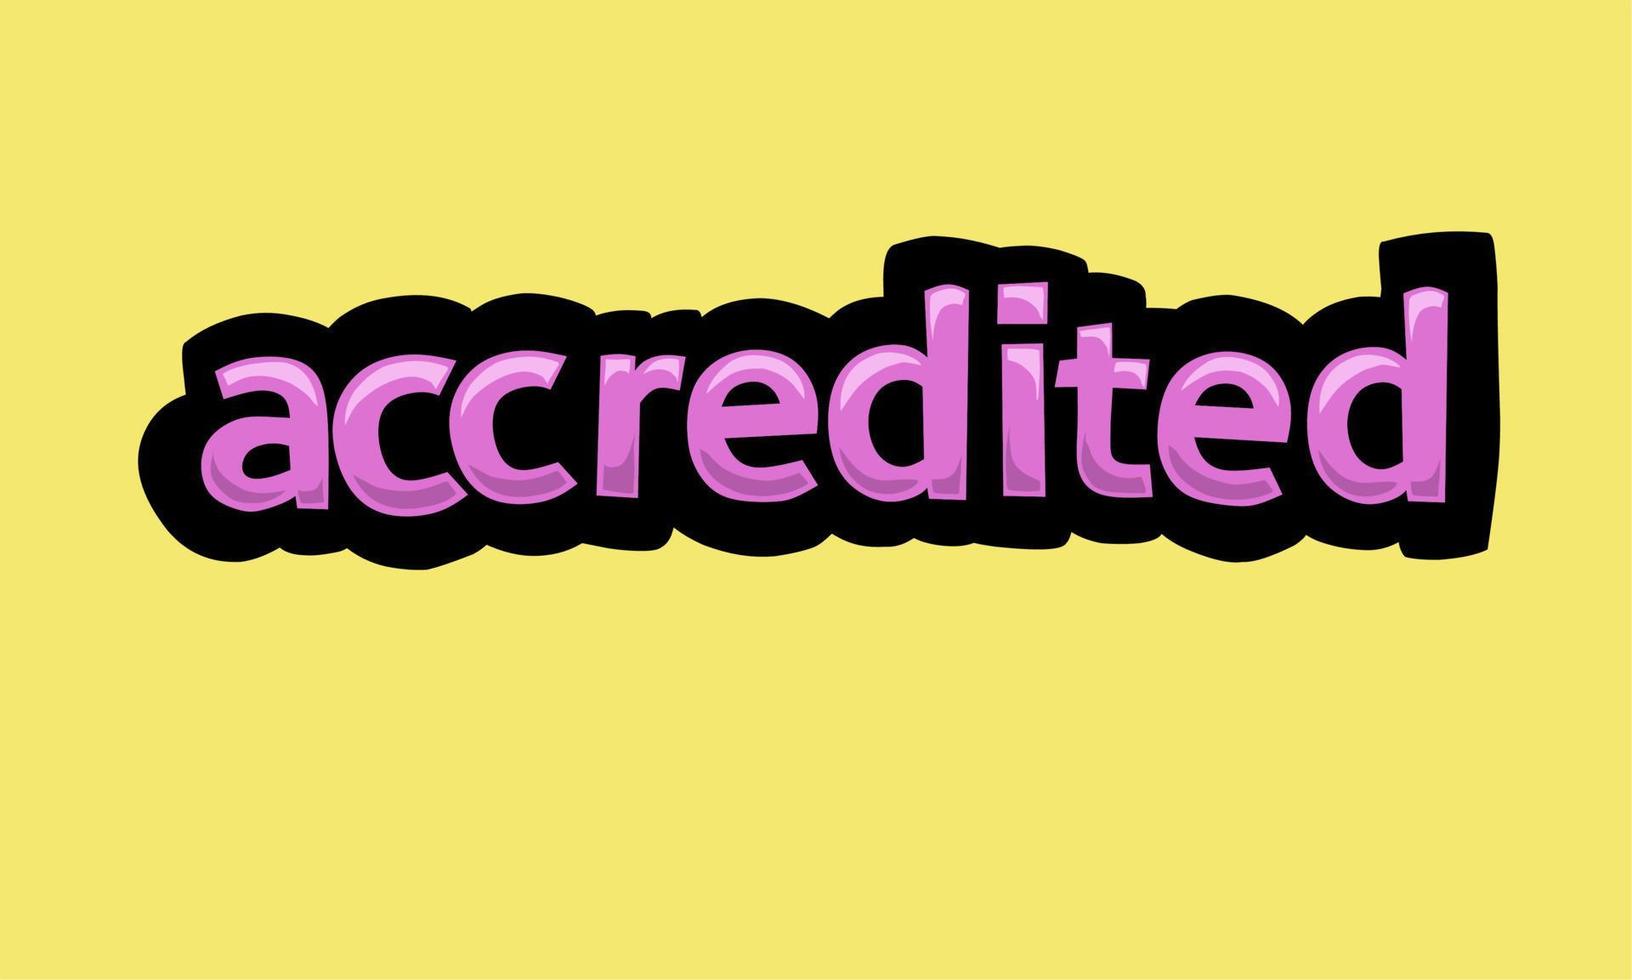 ACCREDITED writing vector design on a yellow background